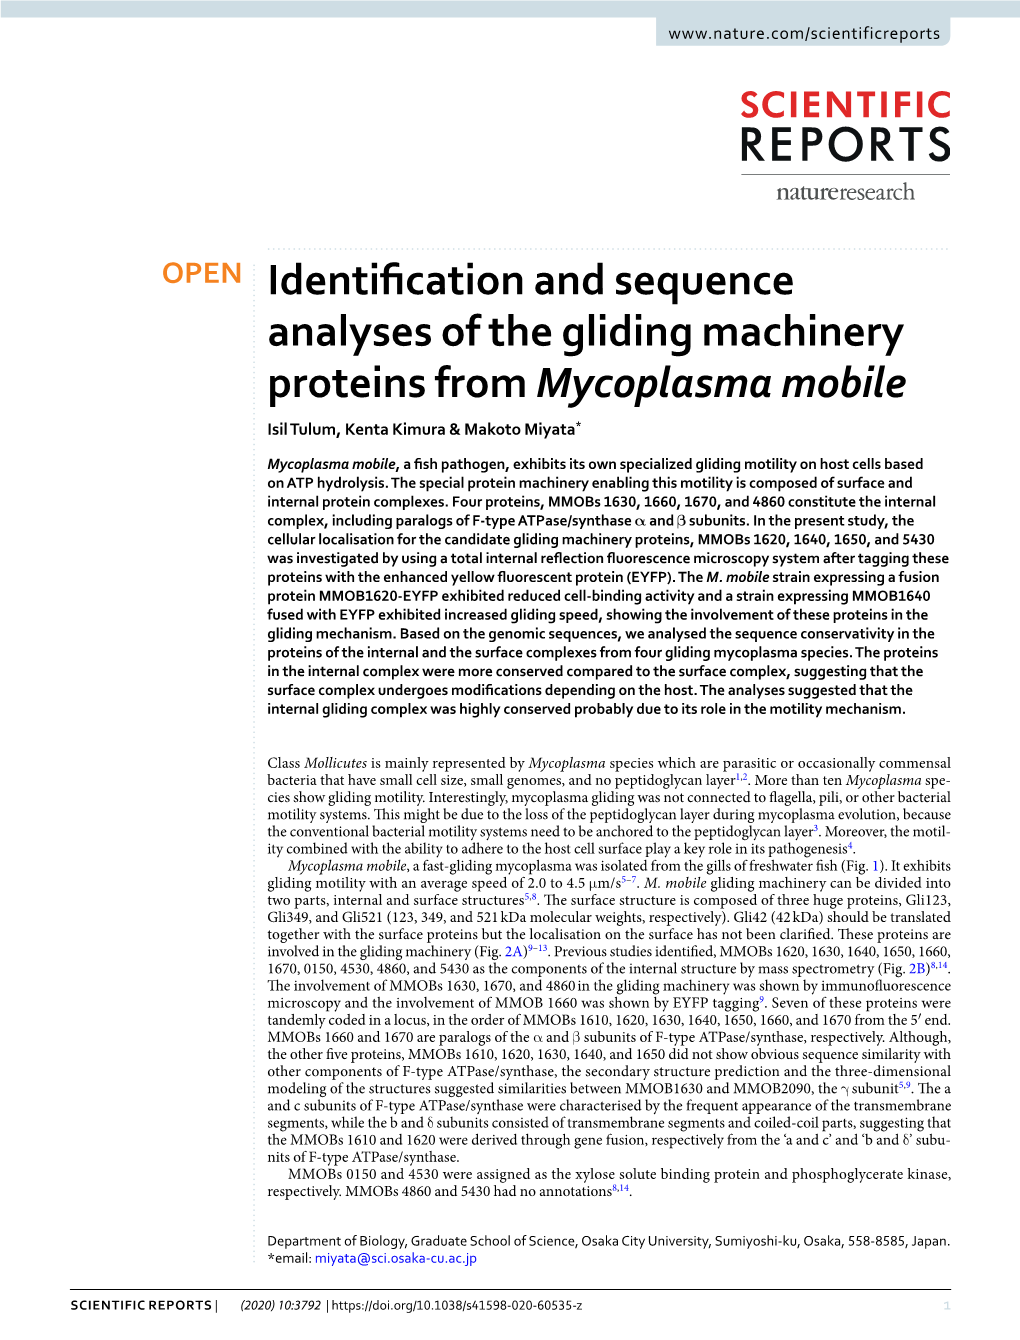 Identification and Sequence Analyses of the Gliding Machinery Proteins